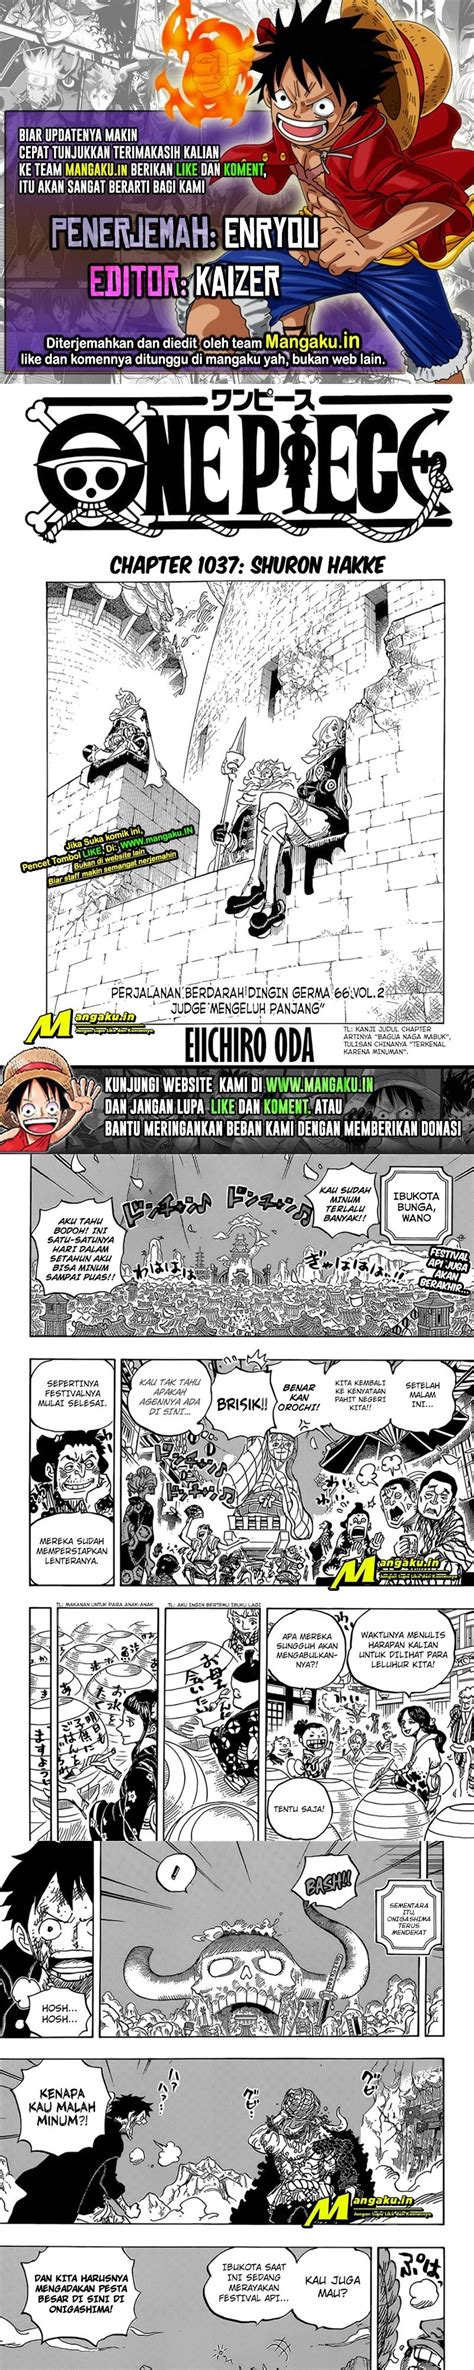 One Piece Chapter 1037 Hq Piscans